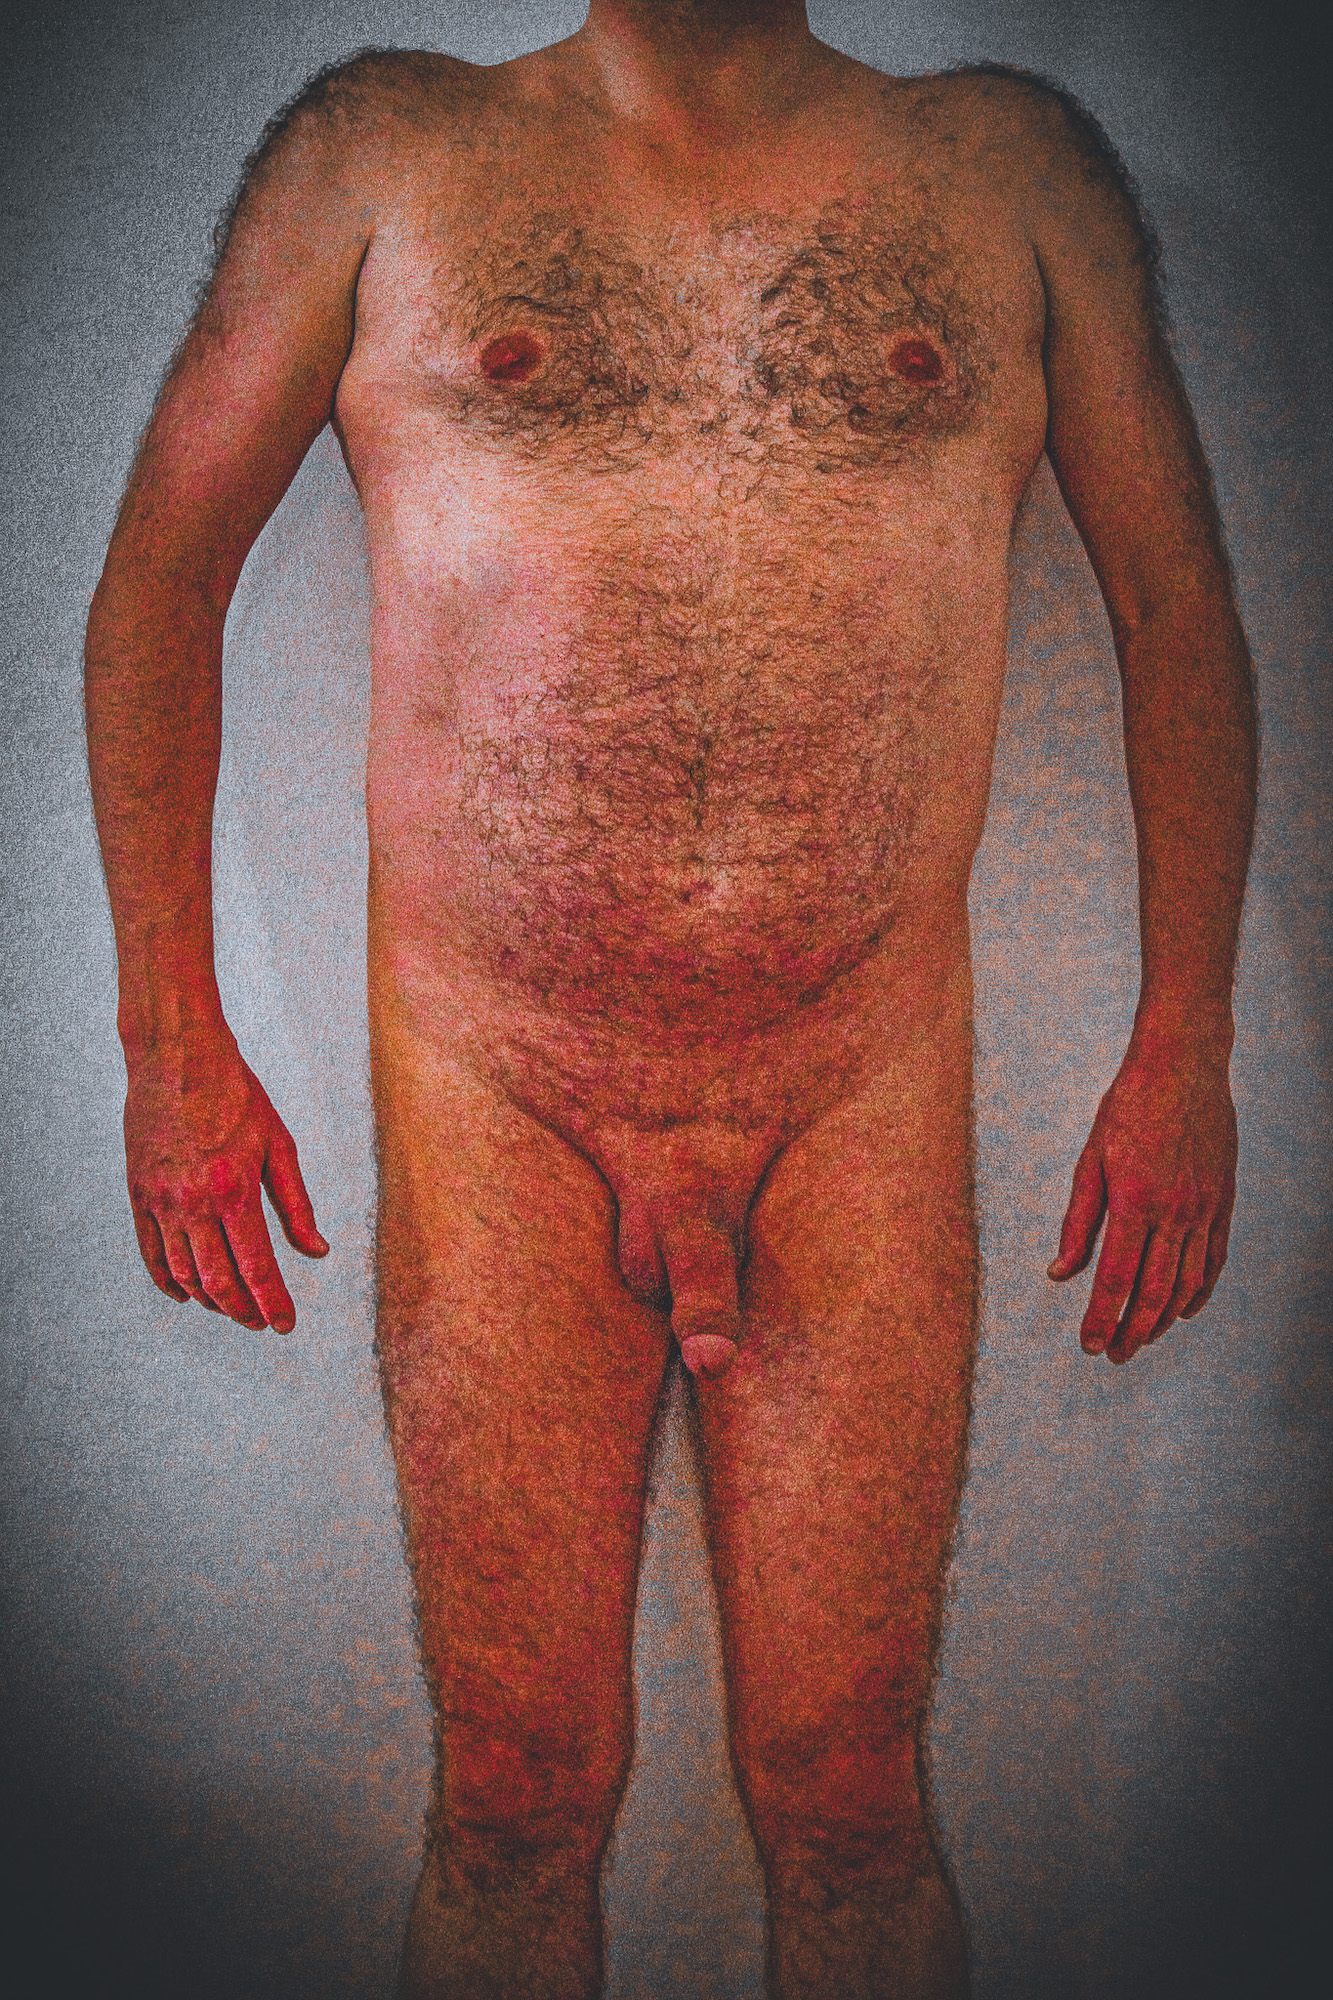 Male nude body showing his shaved genitals